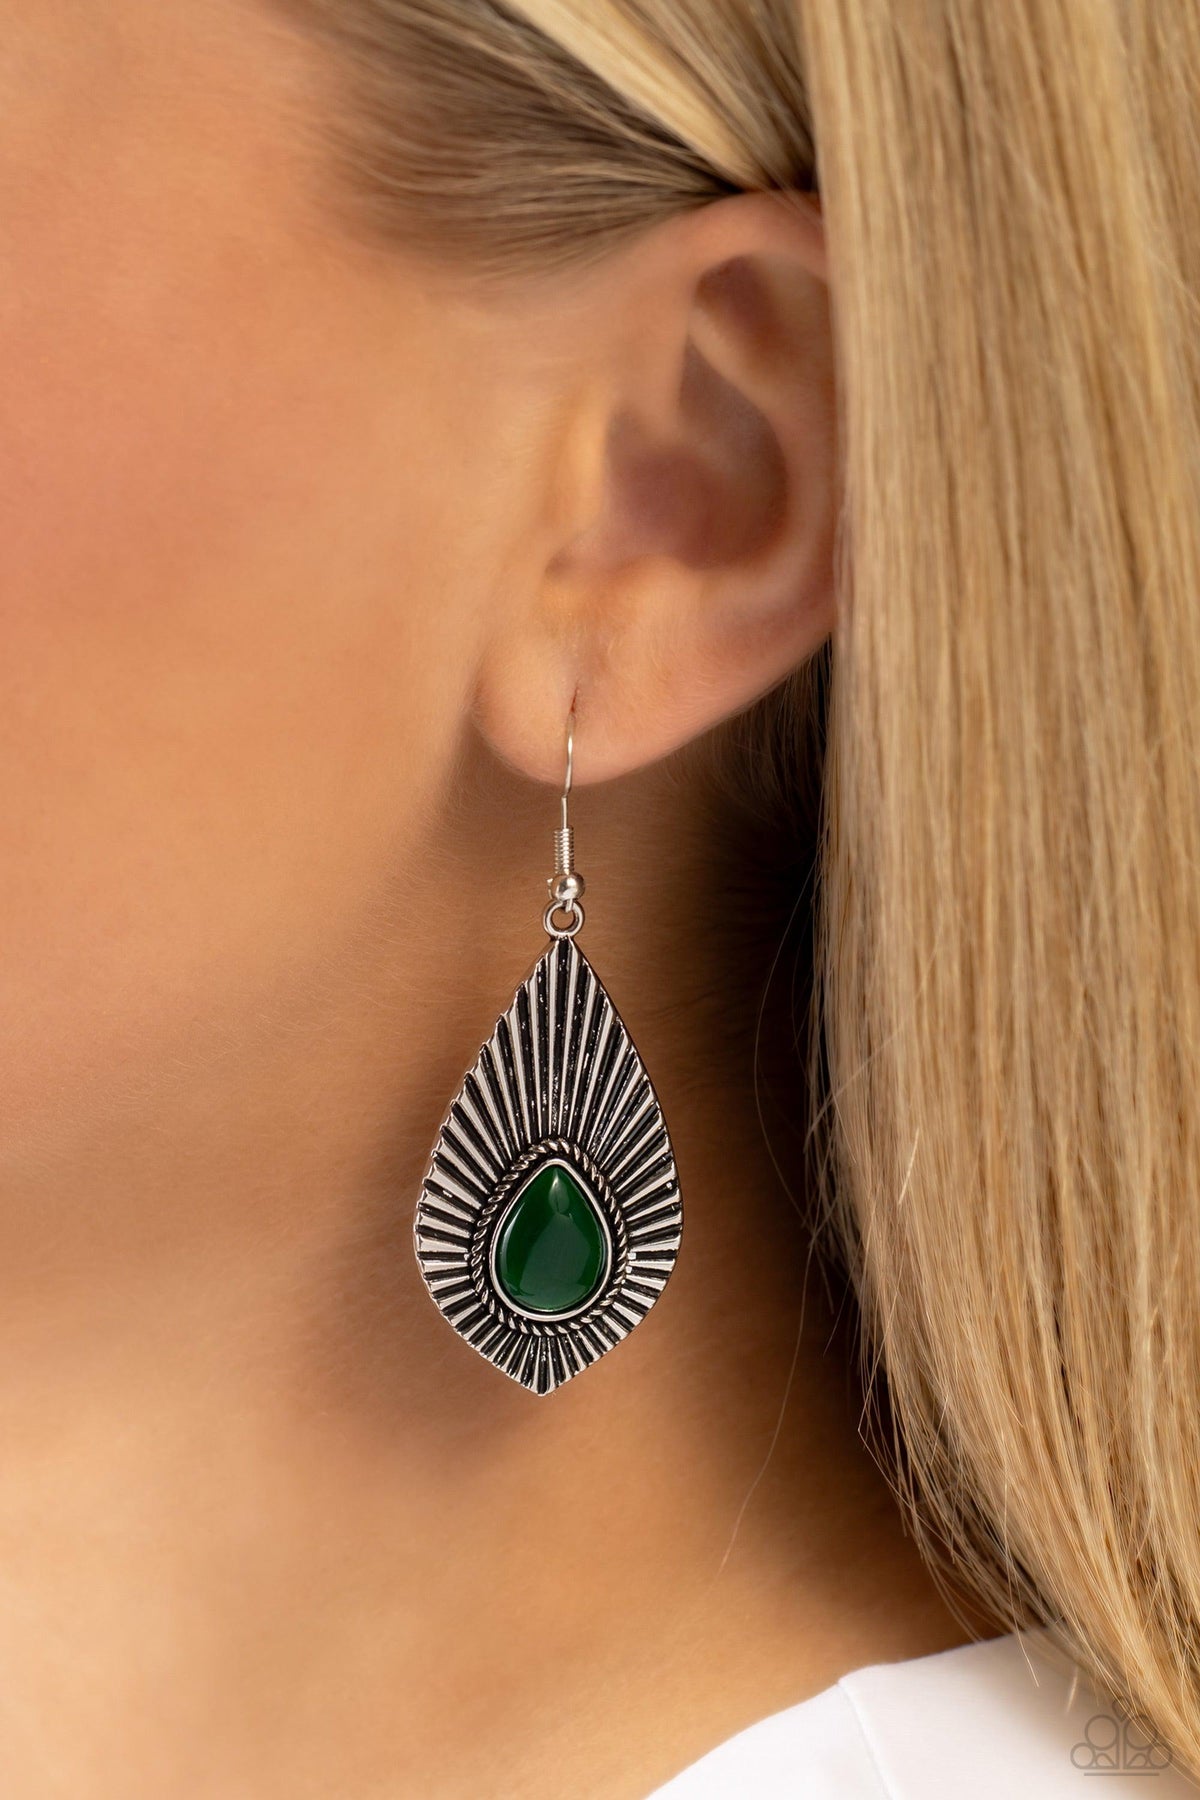 SOUL-ar Flare Green Earrings - Paparazzi Accessories-on model - CarasShop.com - $5 Jewelry by Cara Jewels